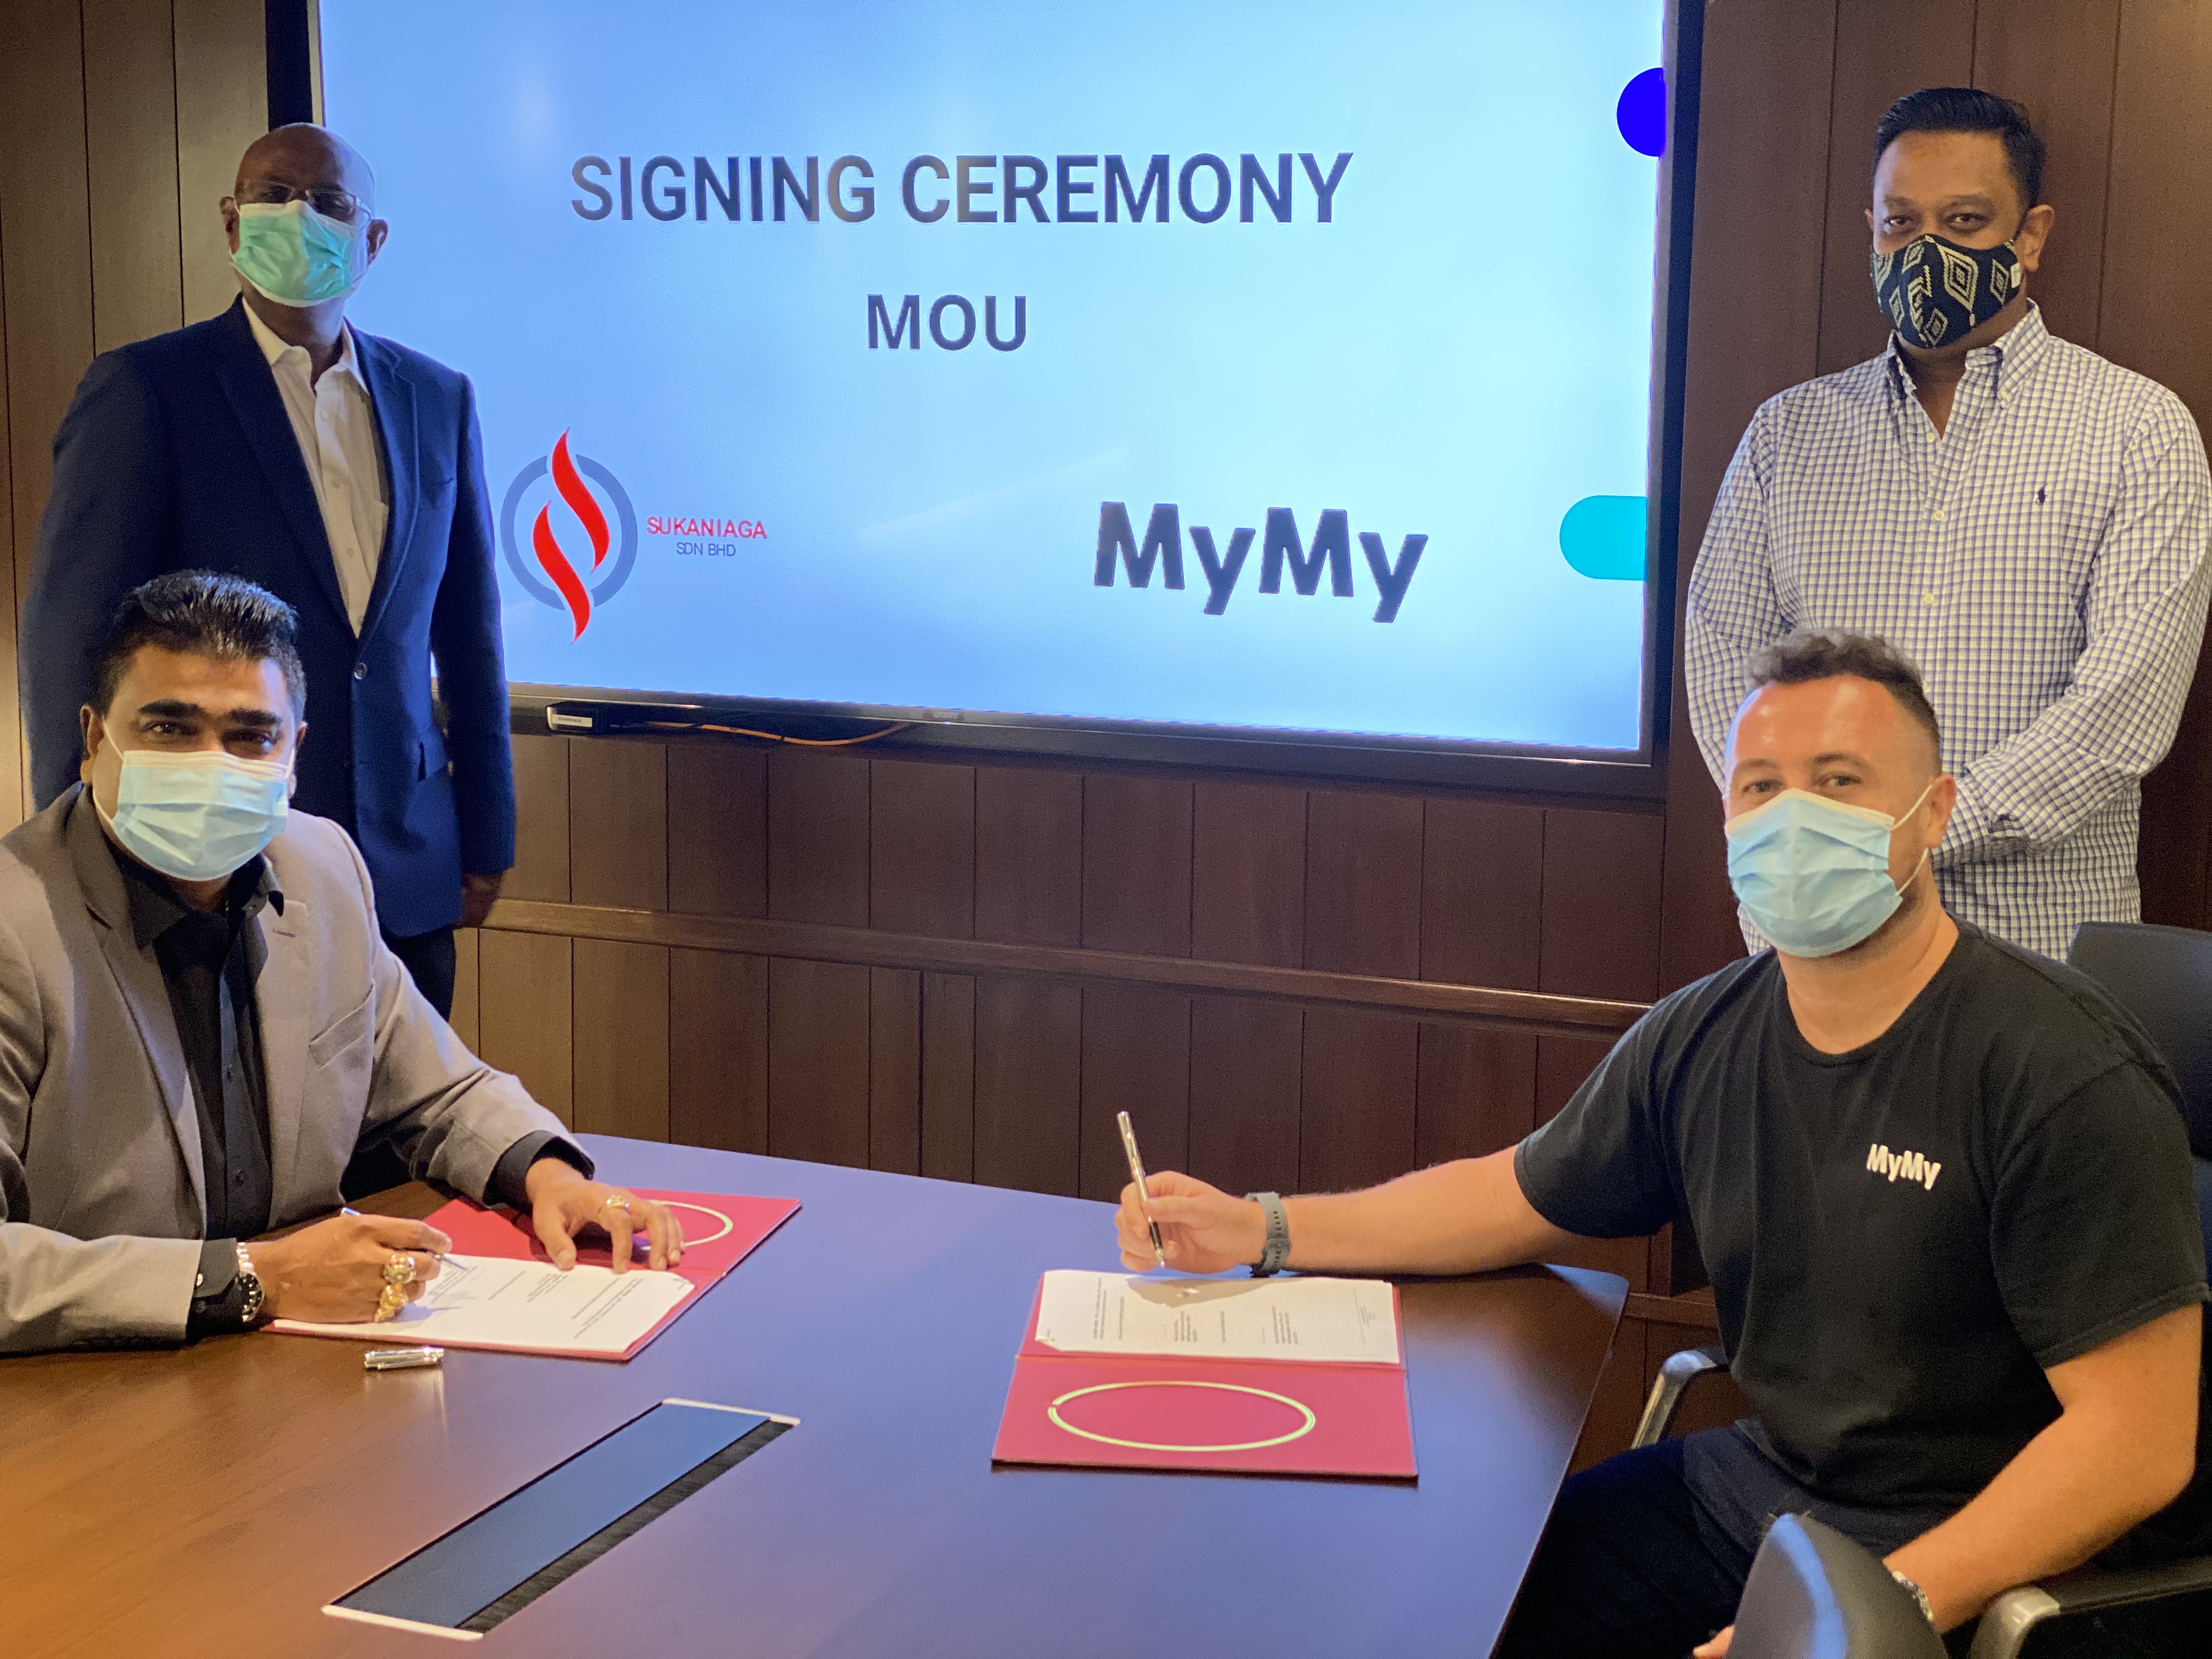 From l to r: Vallo Mutto, Sukaniaga director; Mohammad Shaharul, Sukaniaga managing director; Kishore Samuel, MyMy co-founder and COO; Joe McGuire, MyMy co-founder and CEO at the signing ceremony